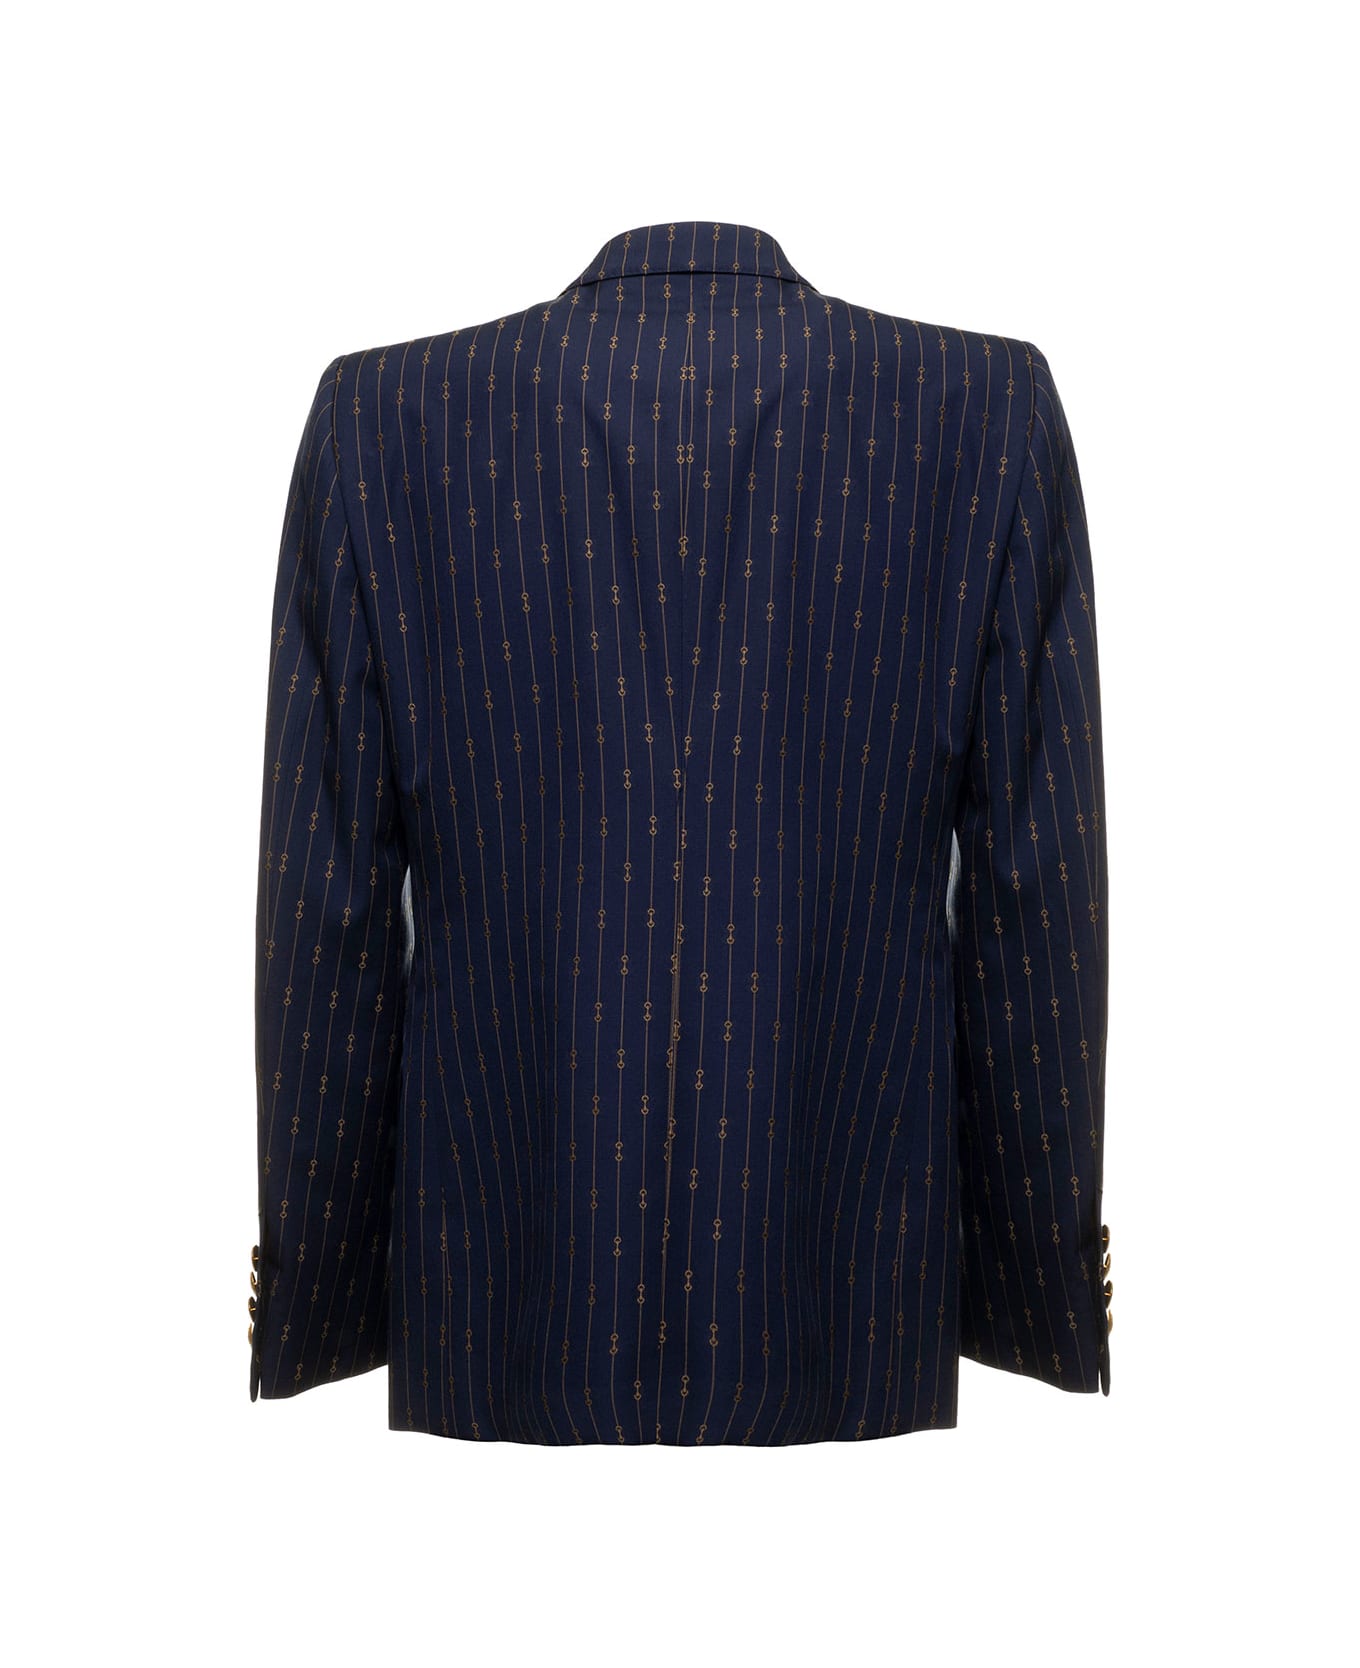 Gucci Man's Blue Printed Wool Double-breasted Blazer - blue ブレザー